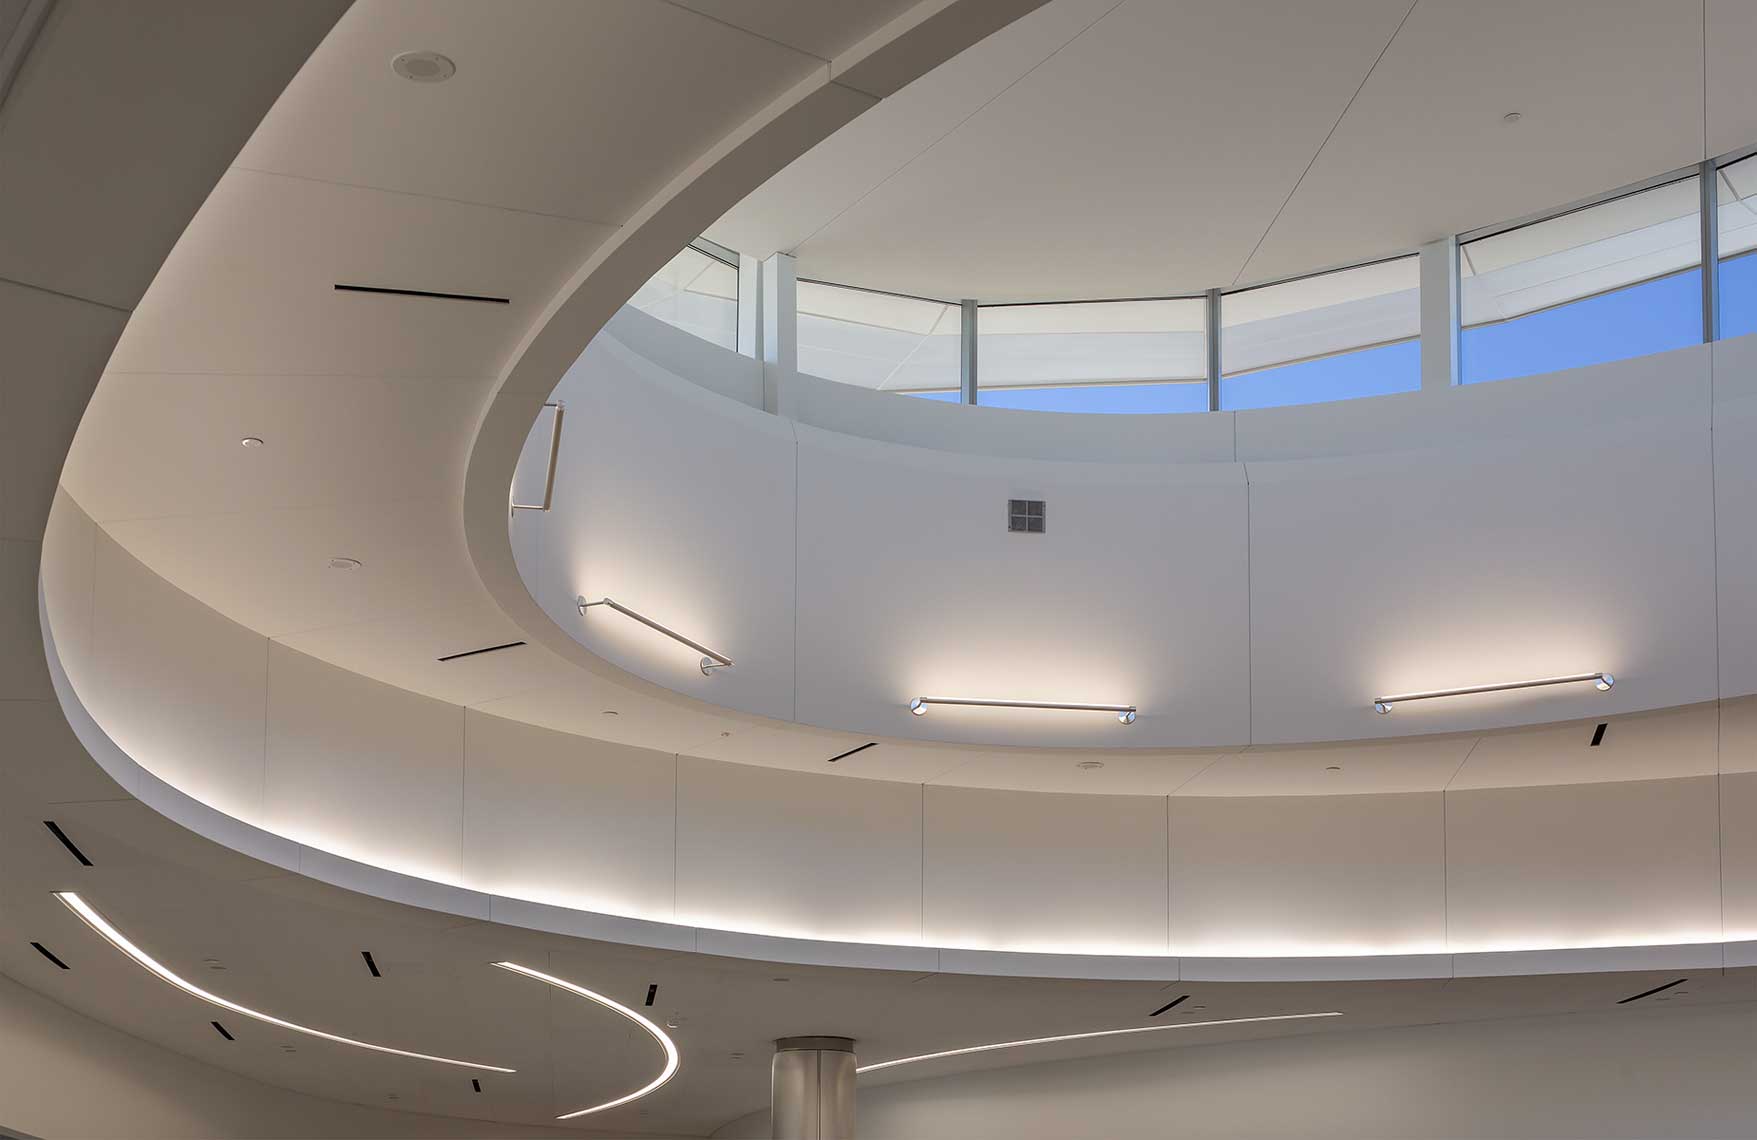 A daytime photograph of the oculus and lighting within the Concourse T North Expansion at Hartsfield Jackson Atlanta International Airport, providing a sense of openness and space.